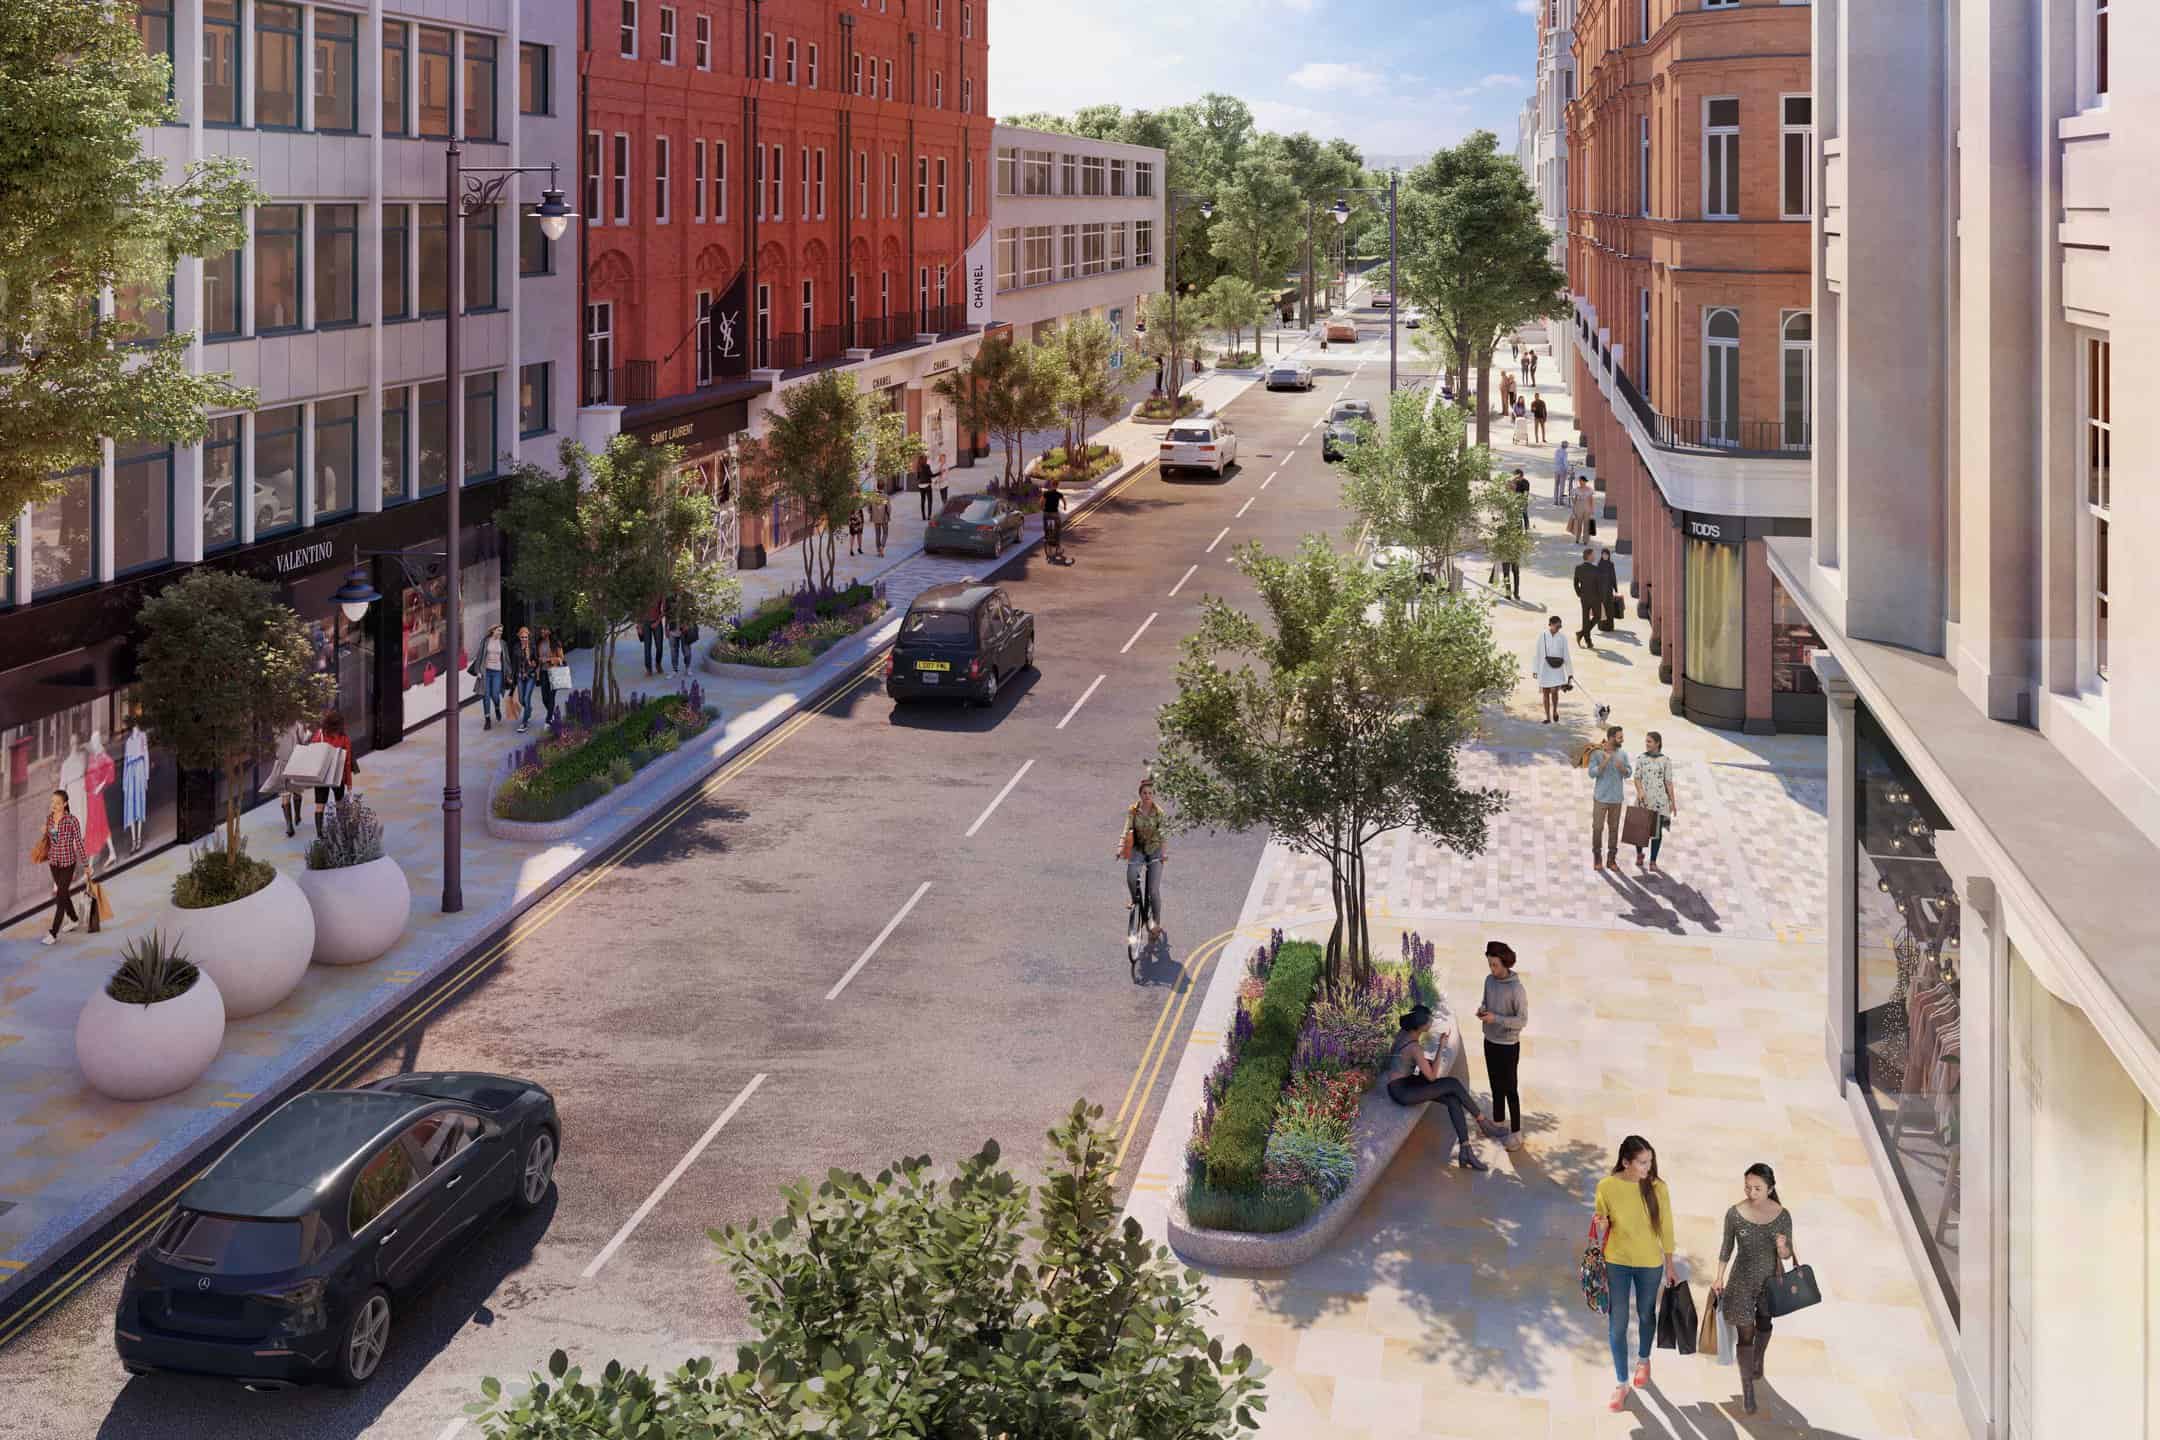 Delayed Sloane Street transformation to start, will see £46m spend